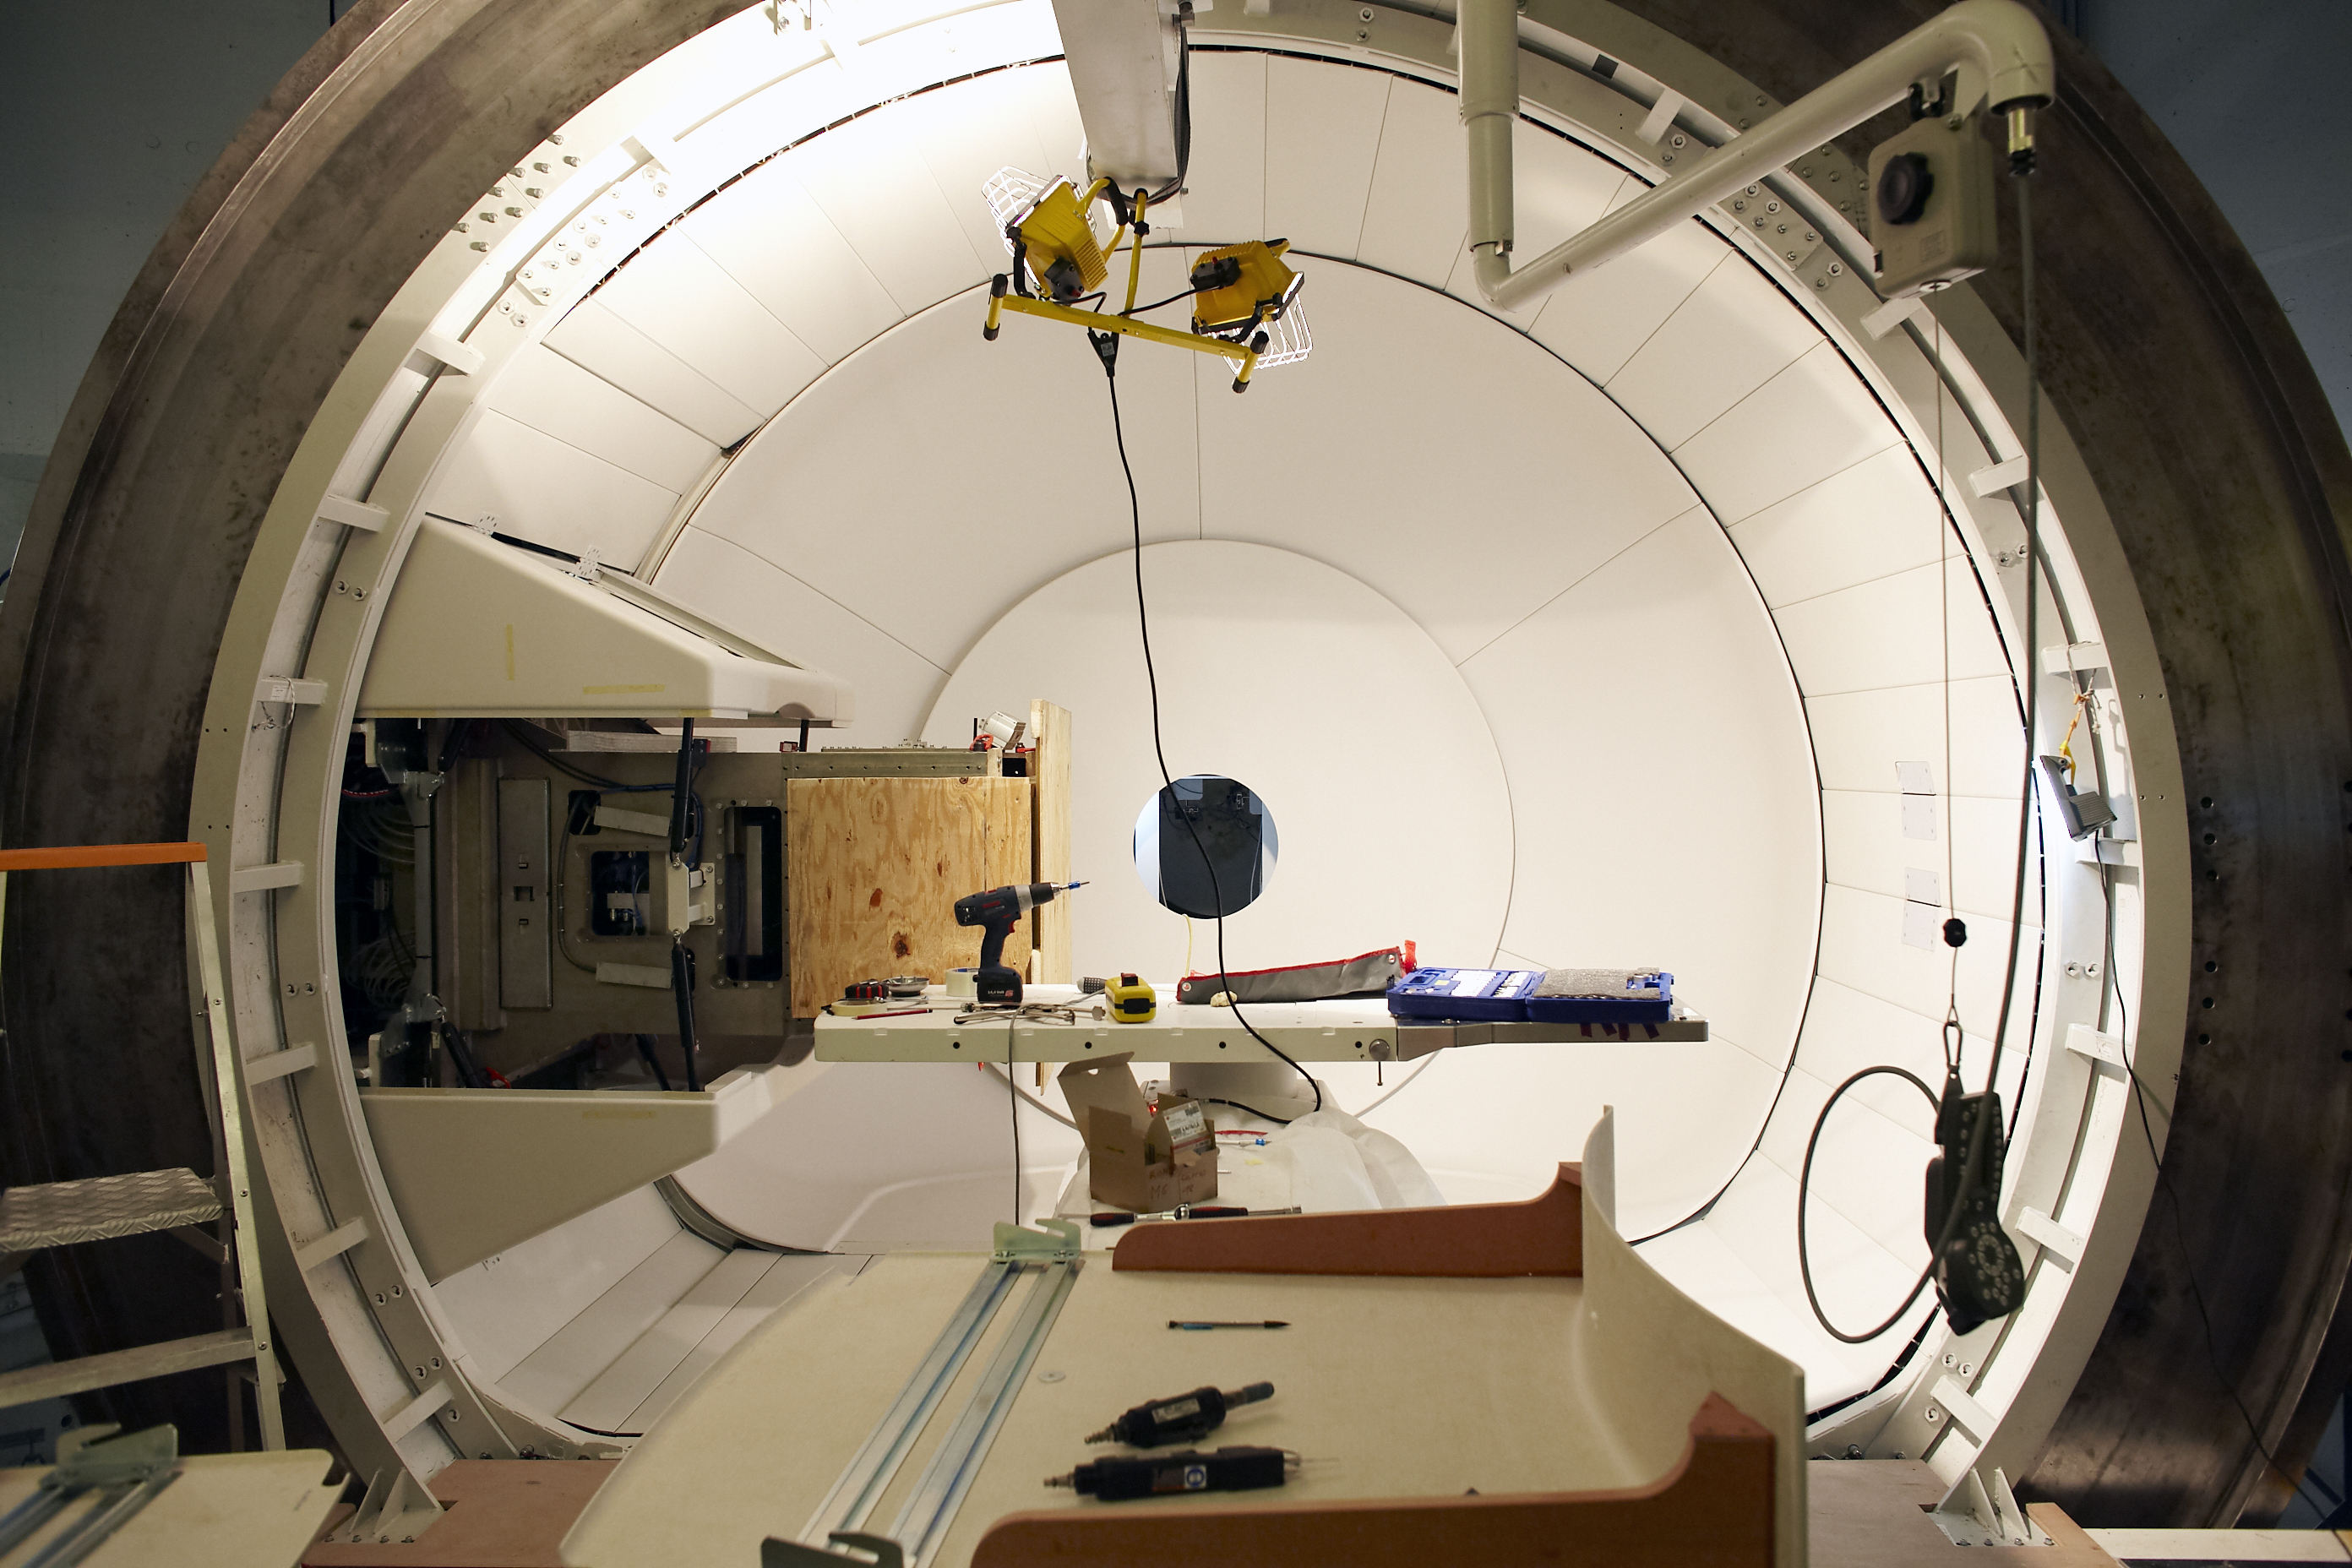 radiation therapy bay during installation